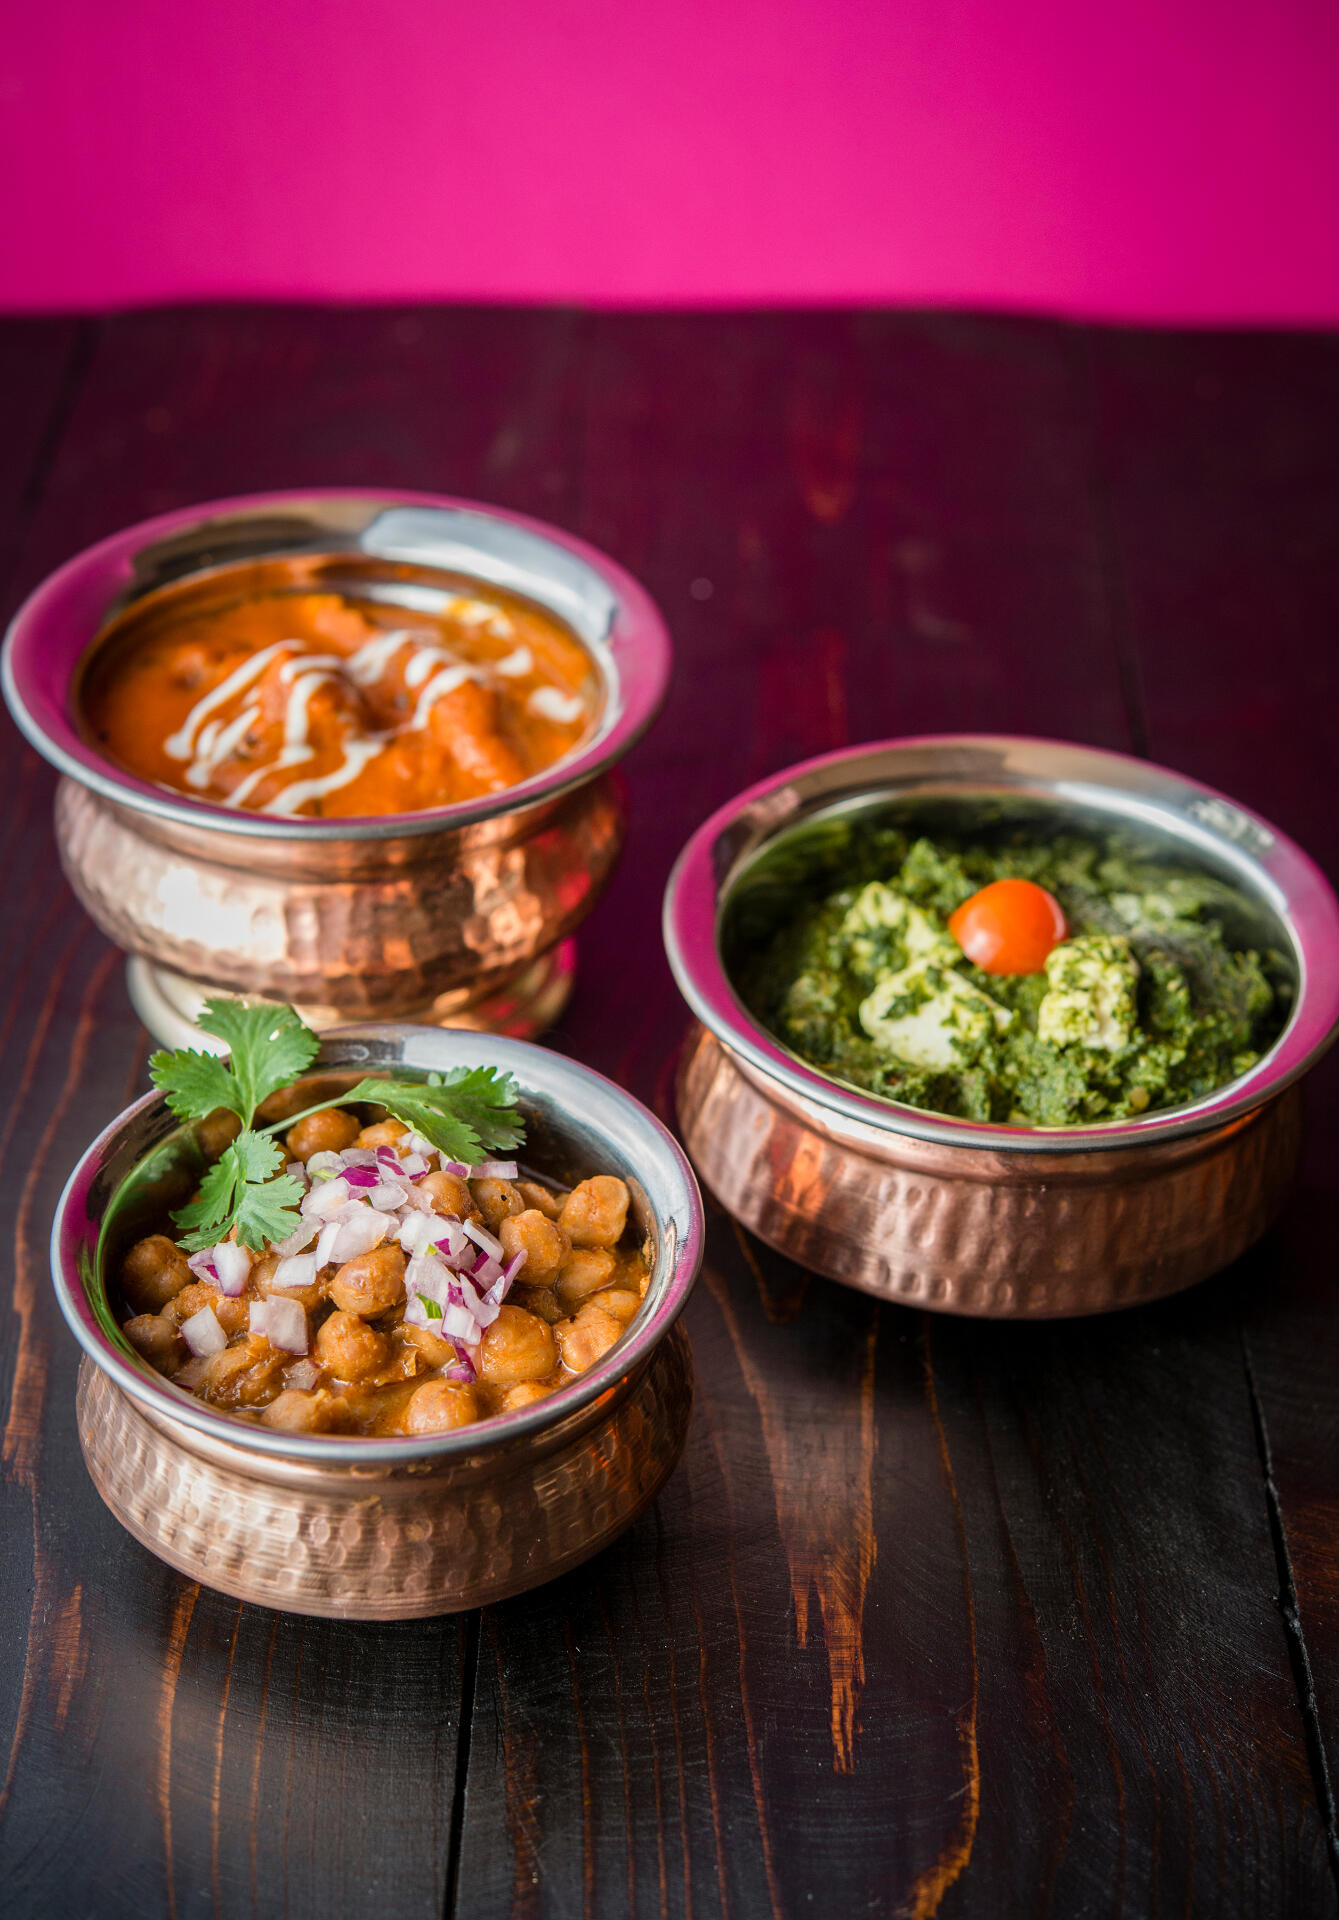 Chef Shachi Mehra of Adya shares her tips for India's Pink City